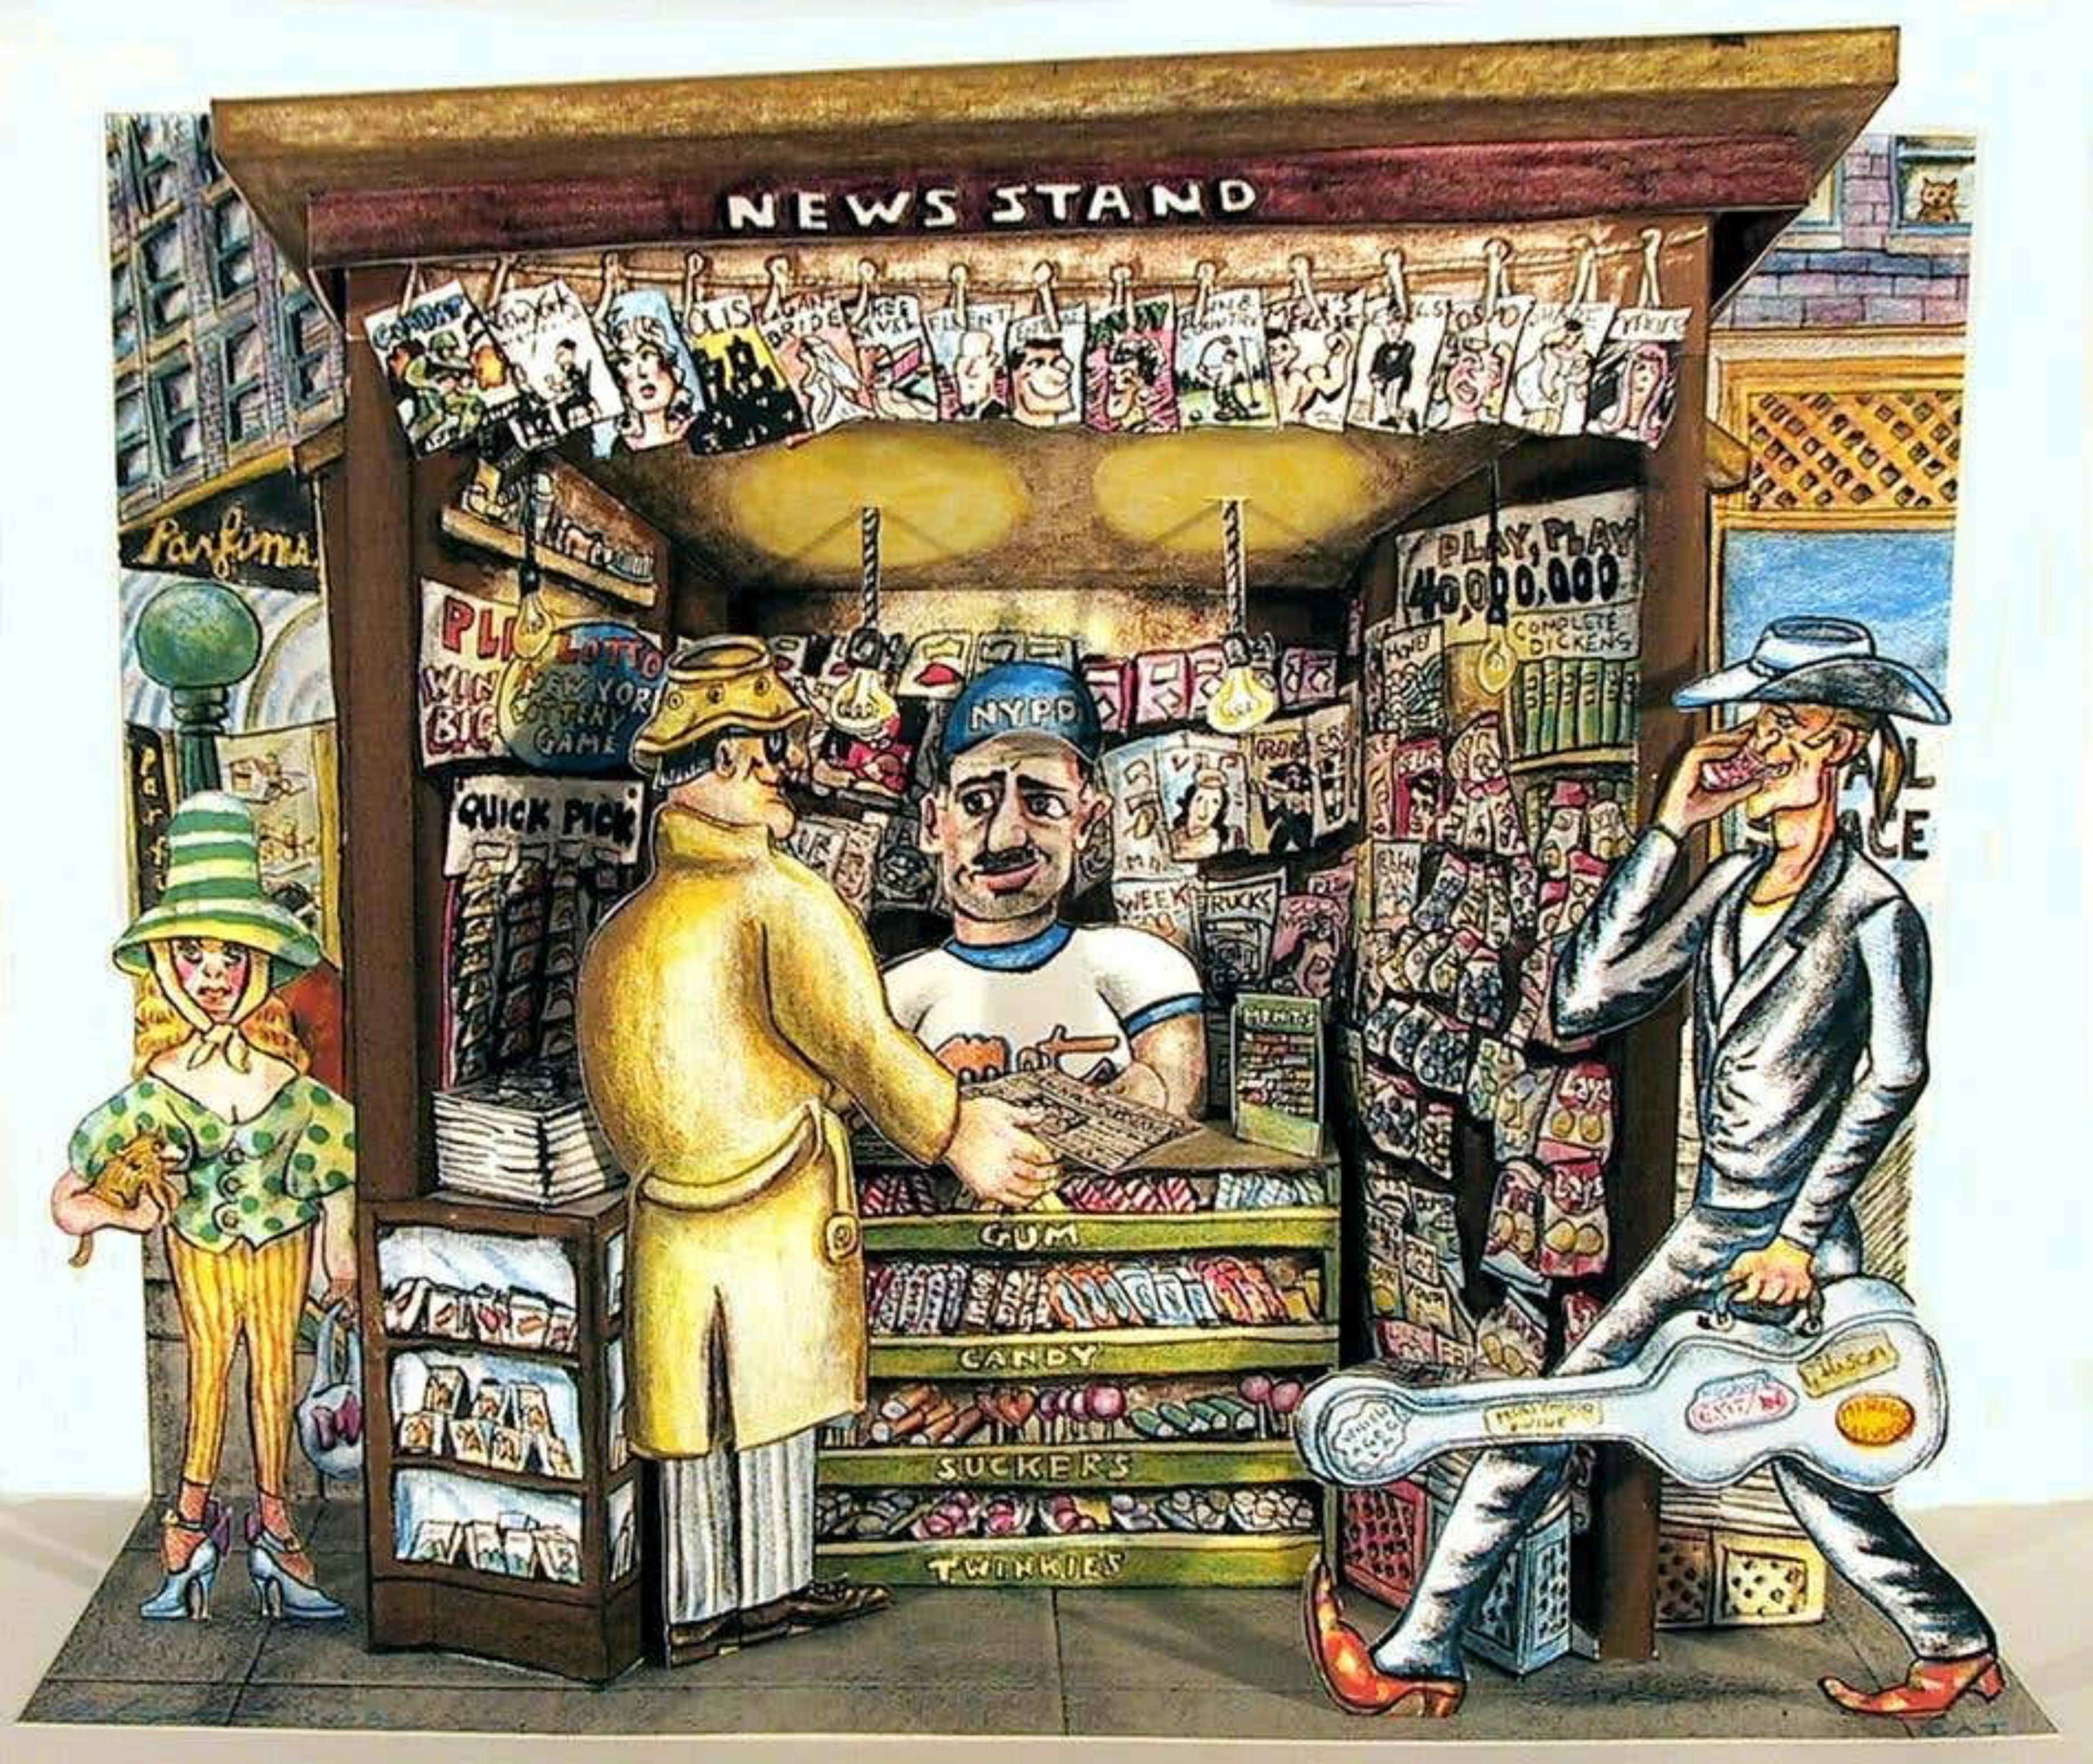 Extra, Extra Read All About It  (New York City Newsstand) - Mixed Media Art by Red Grooms